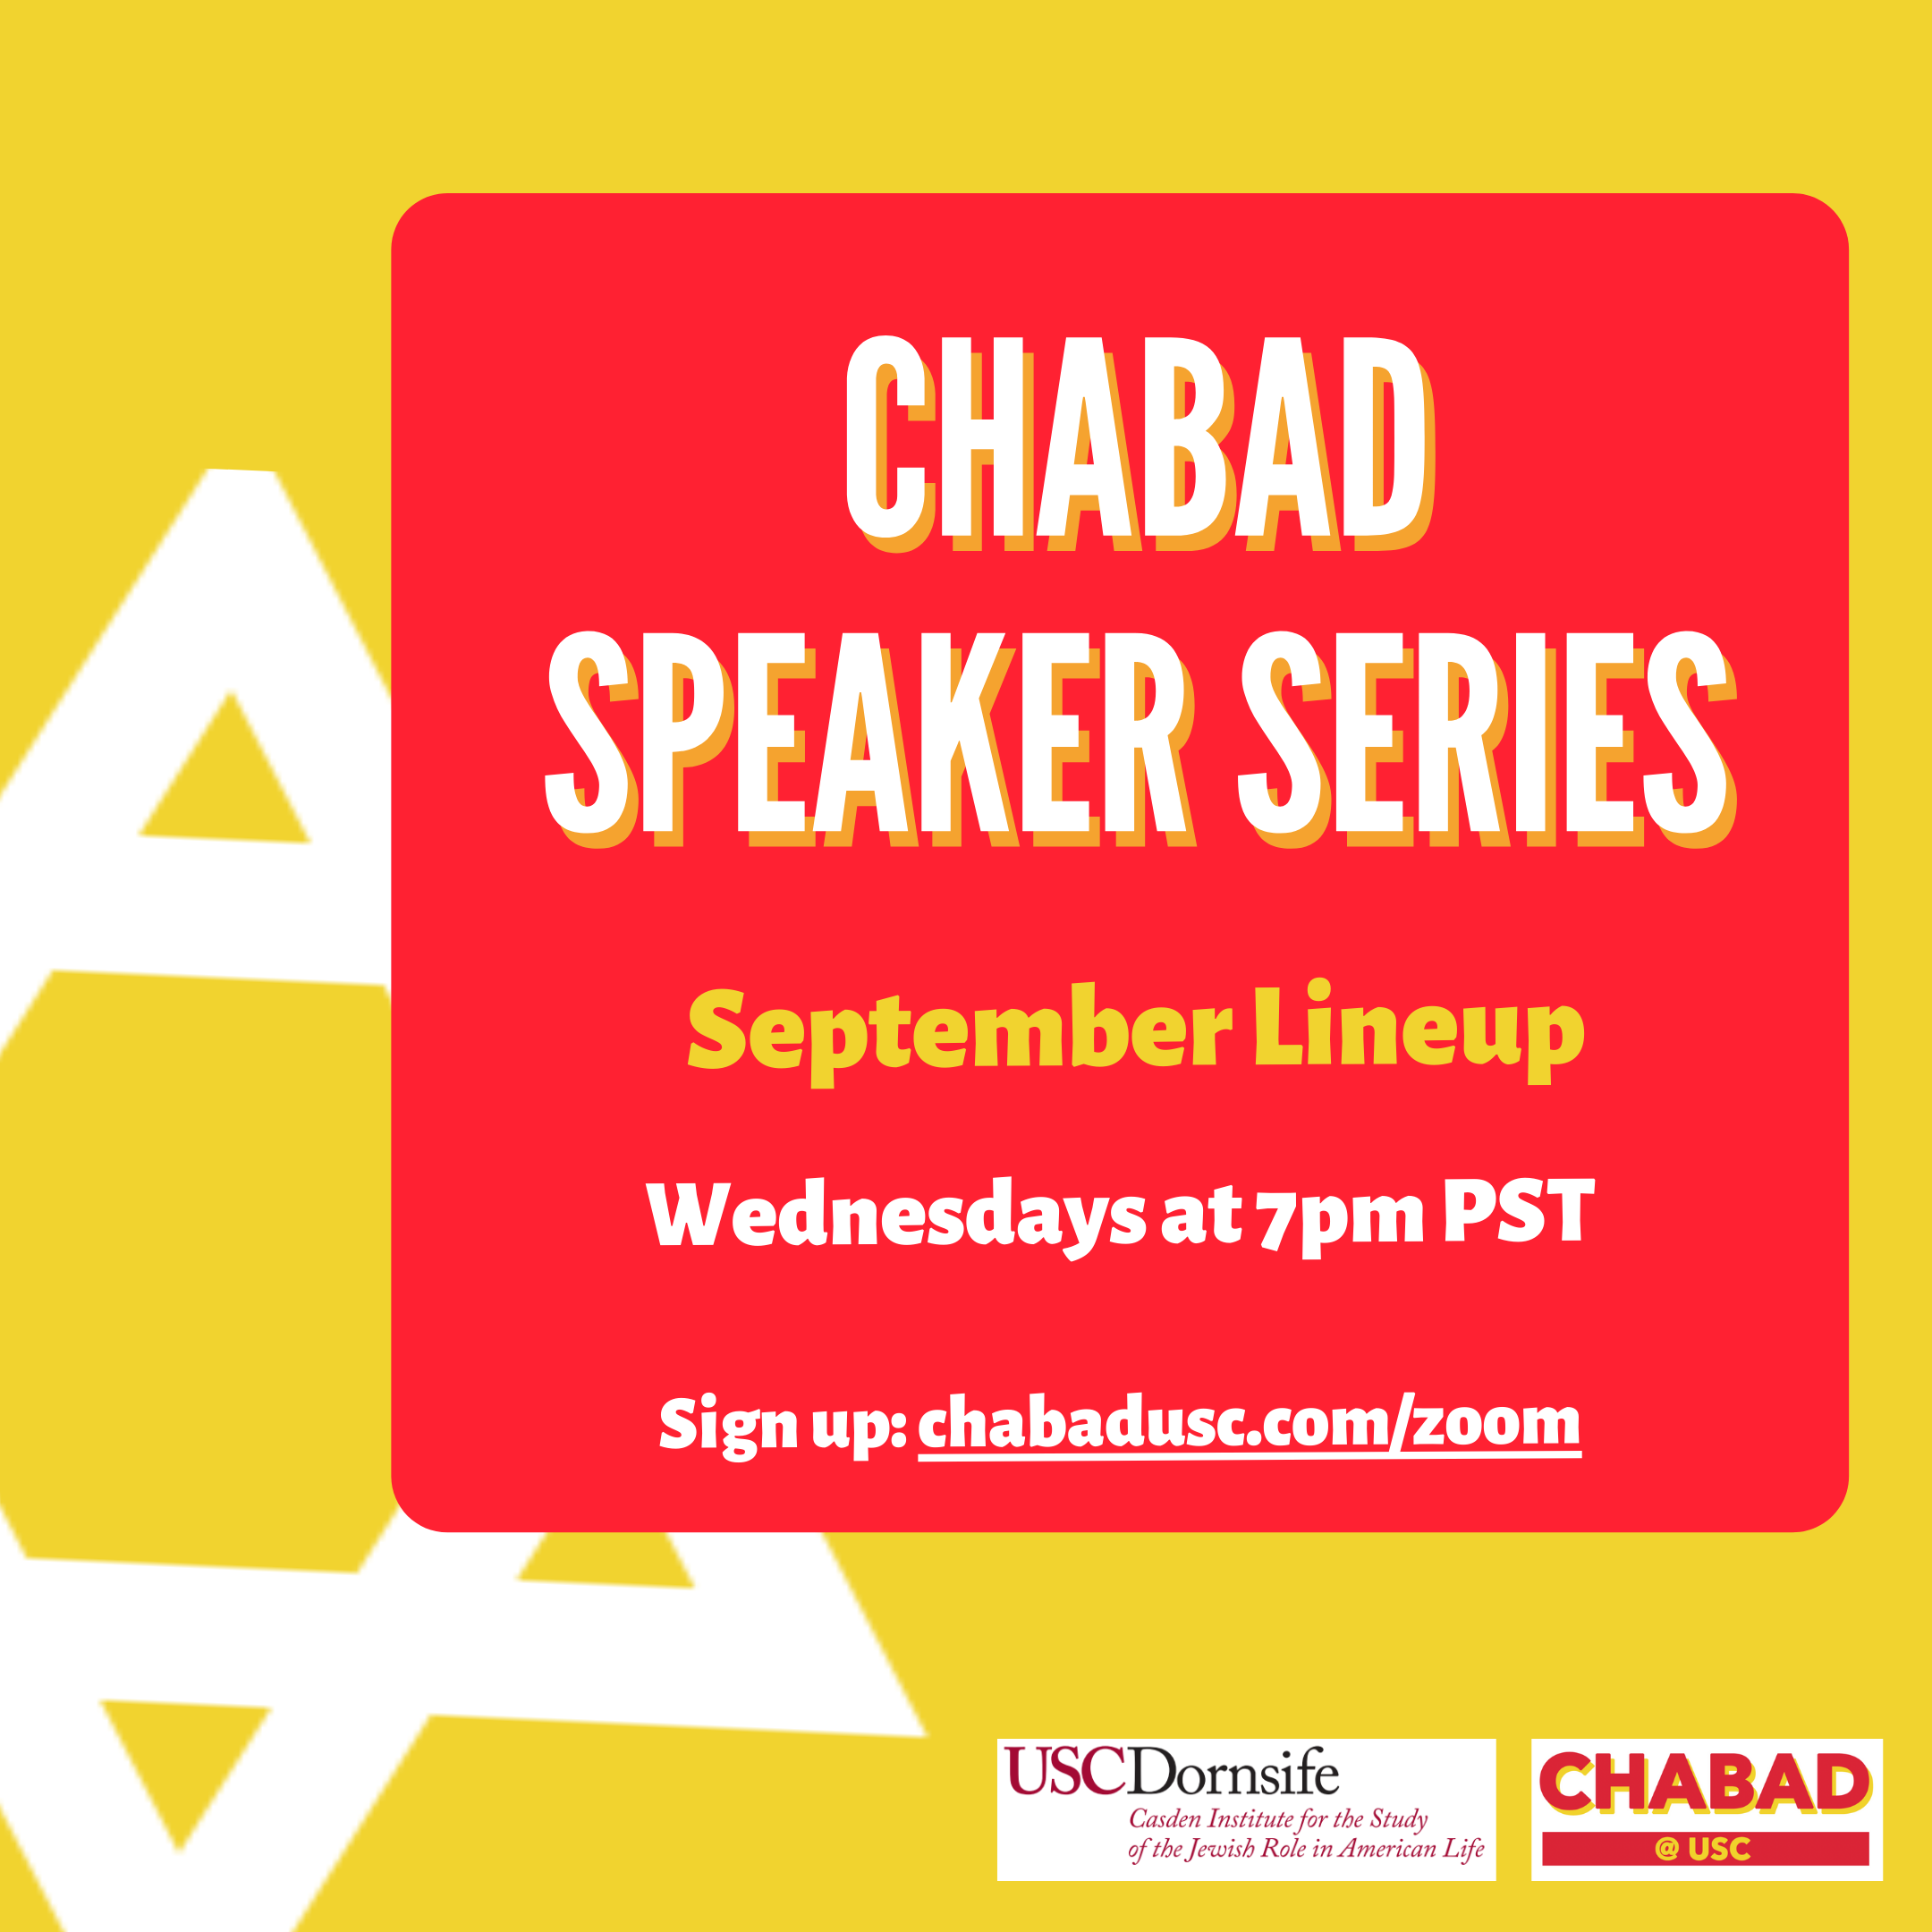 Chabad Speaker Series Lineup.png